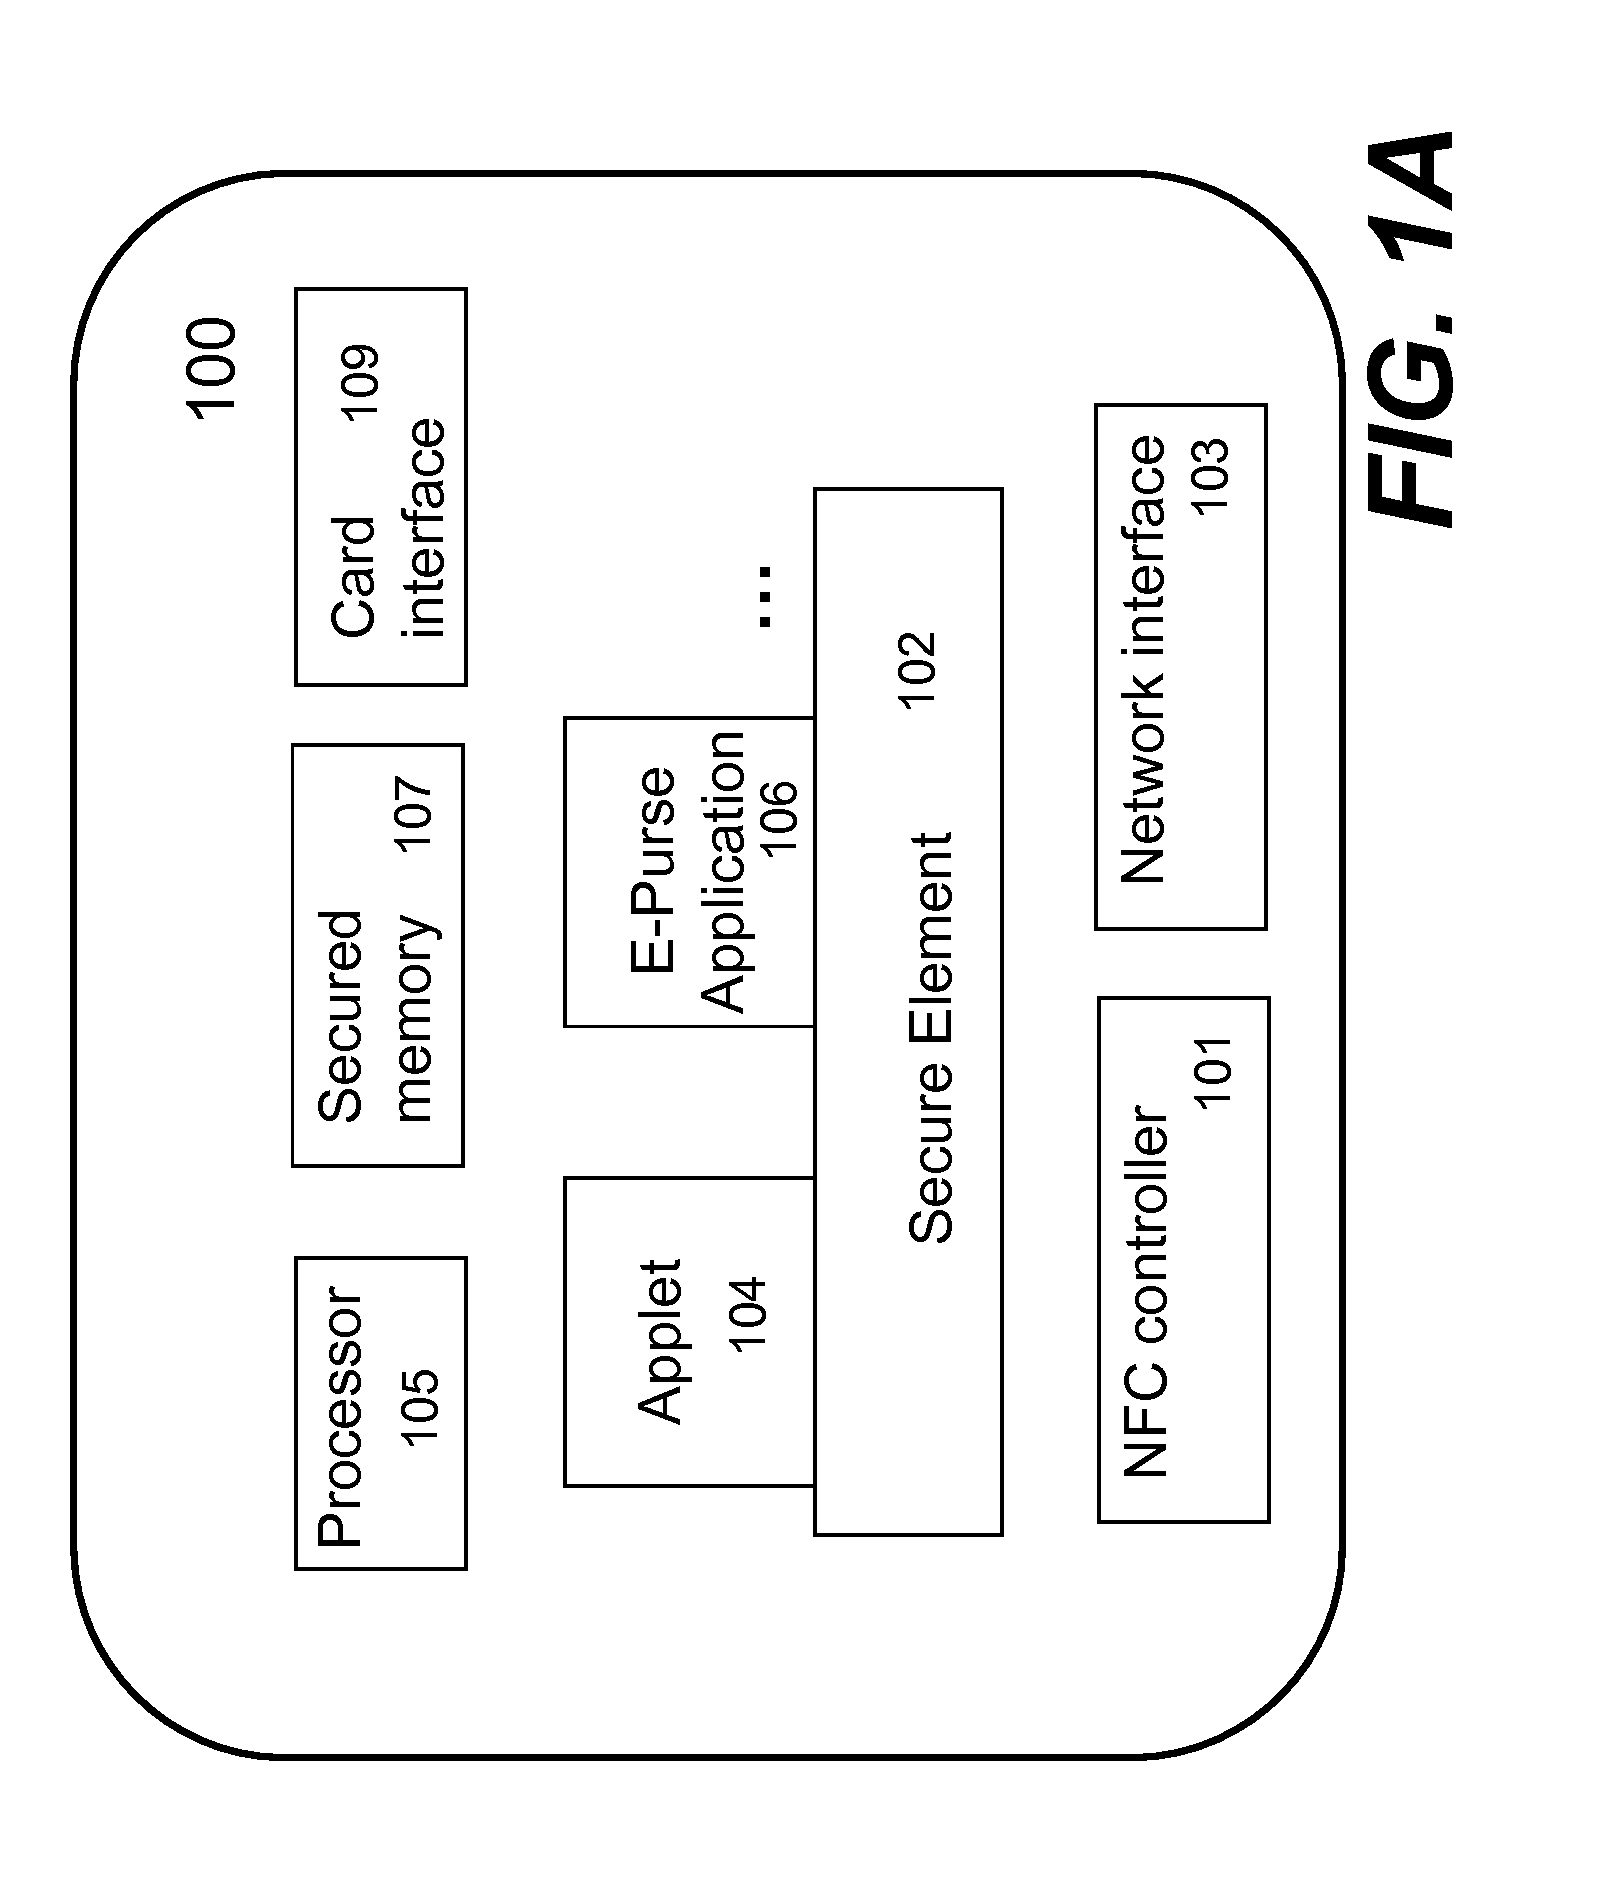 Method and system for providing controllable trusted service manager